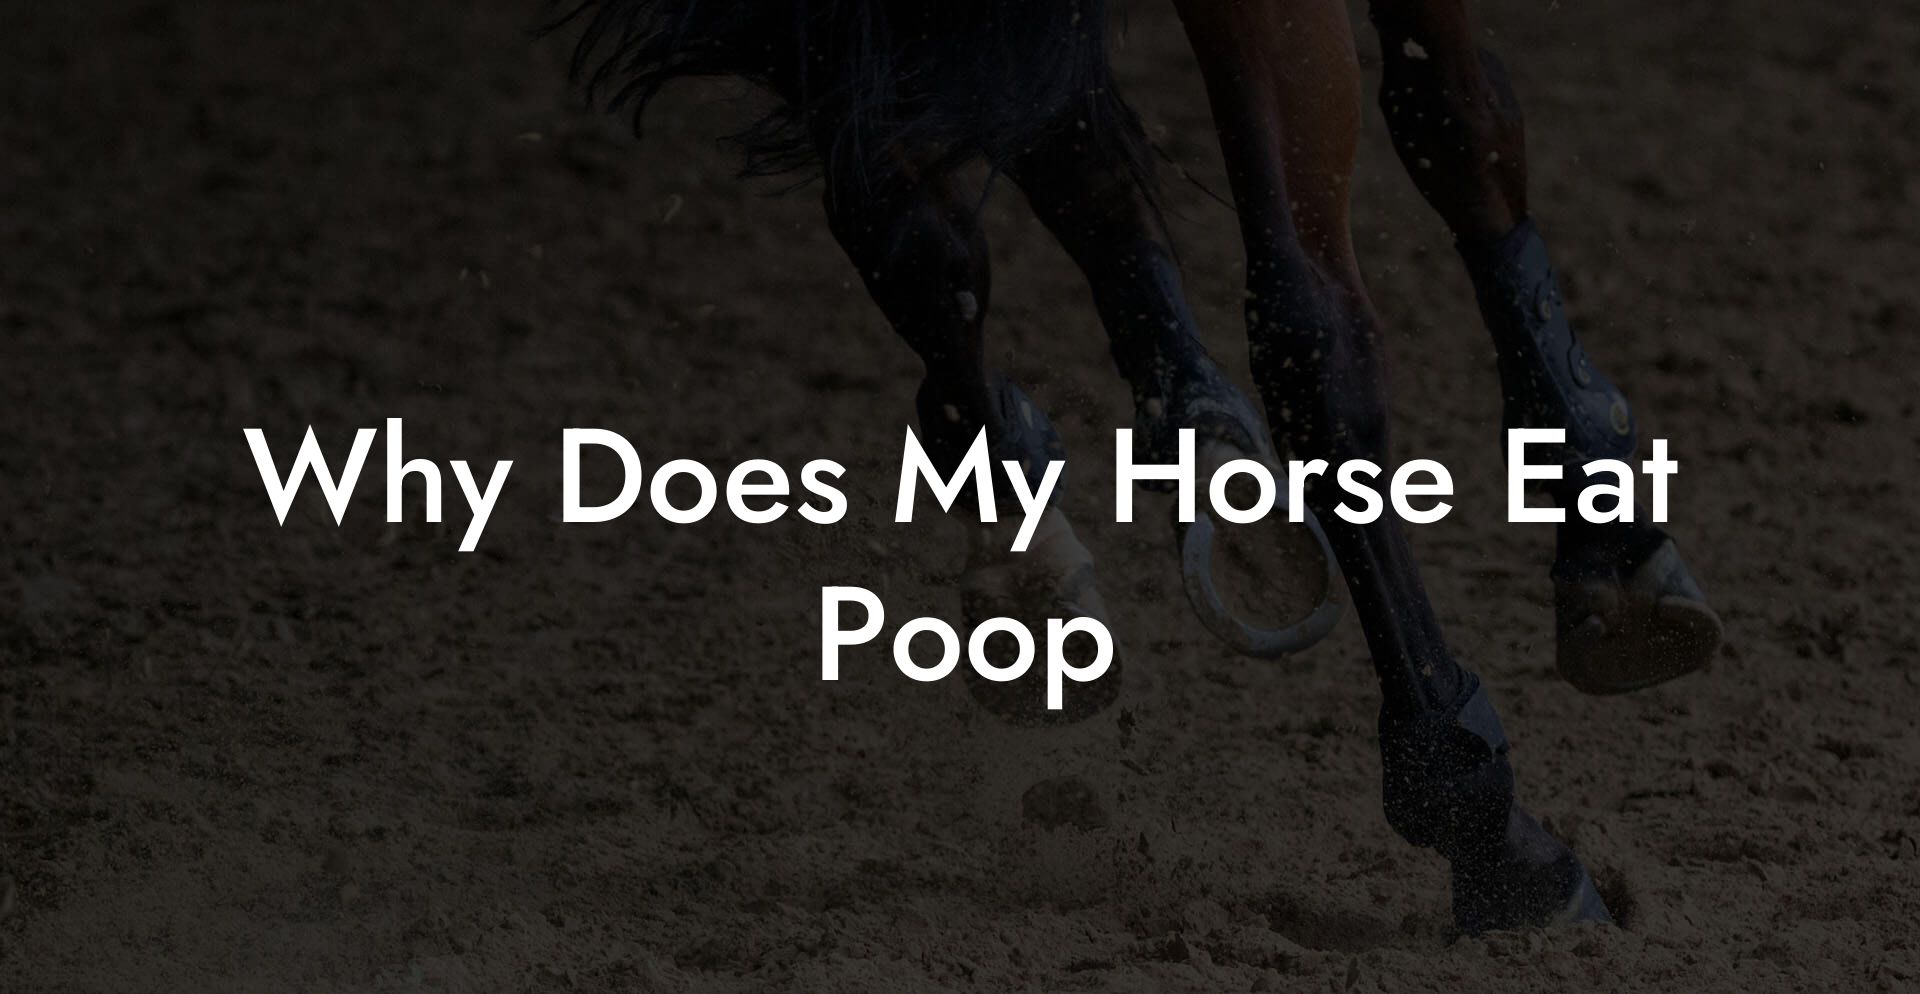 Why Does My Horse Eat Poop